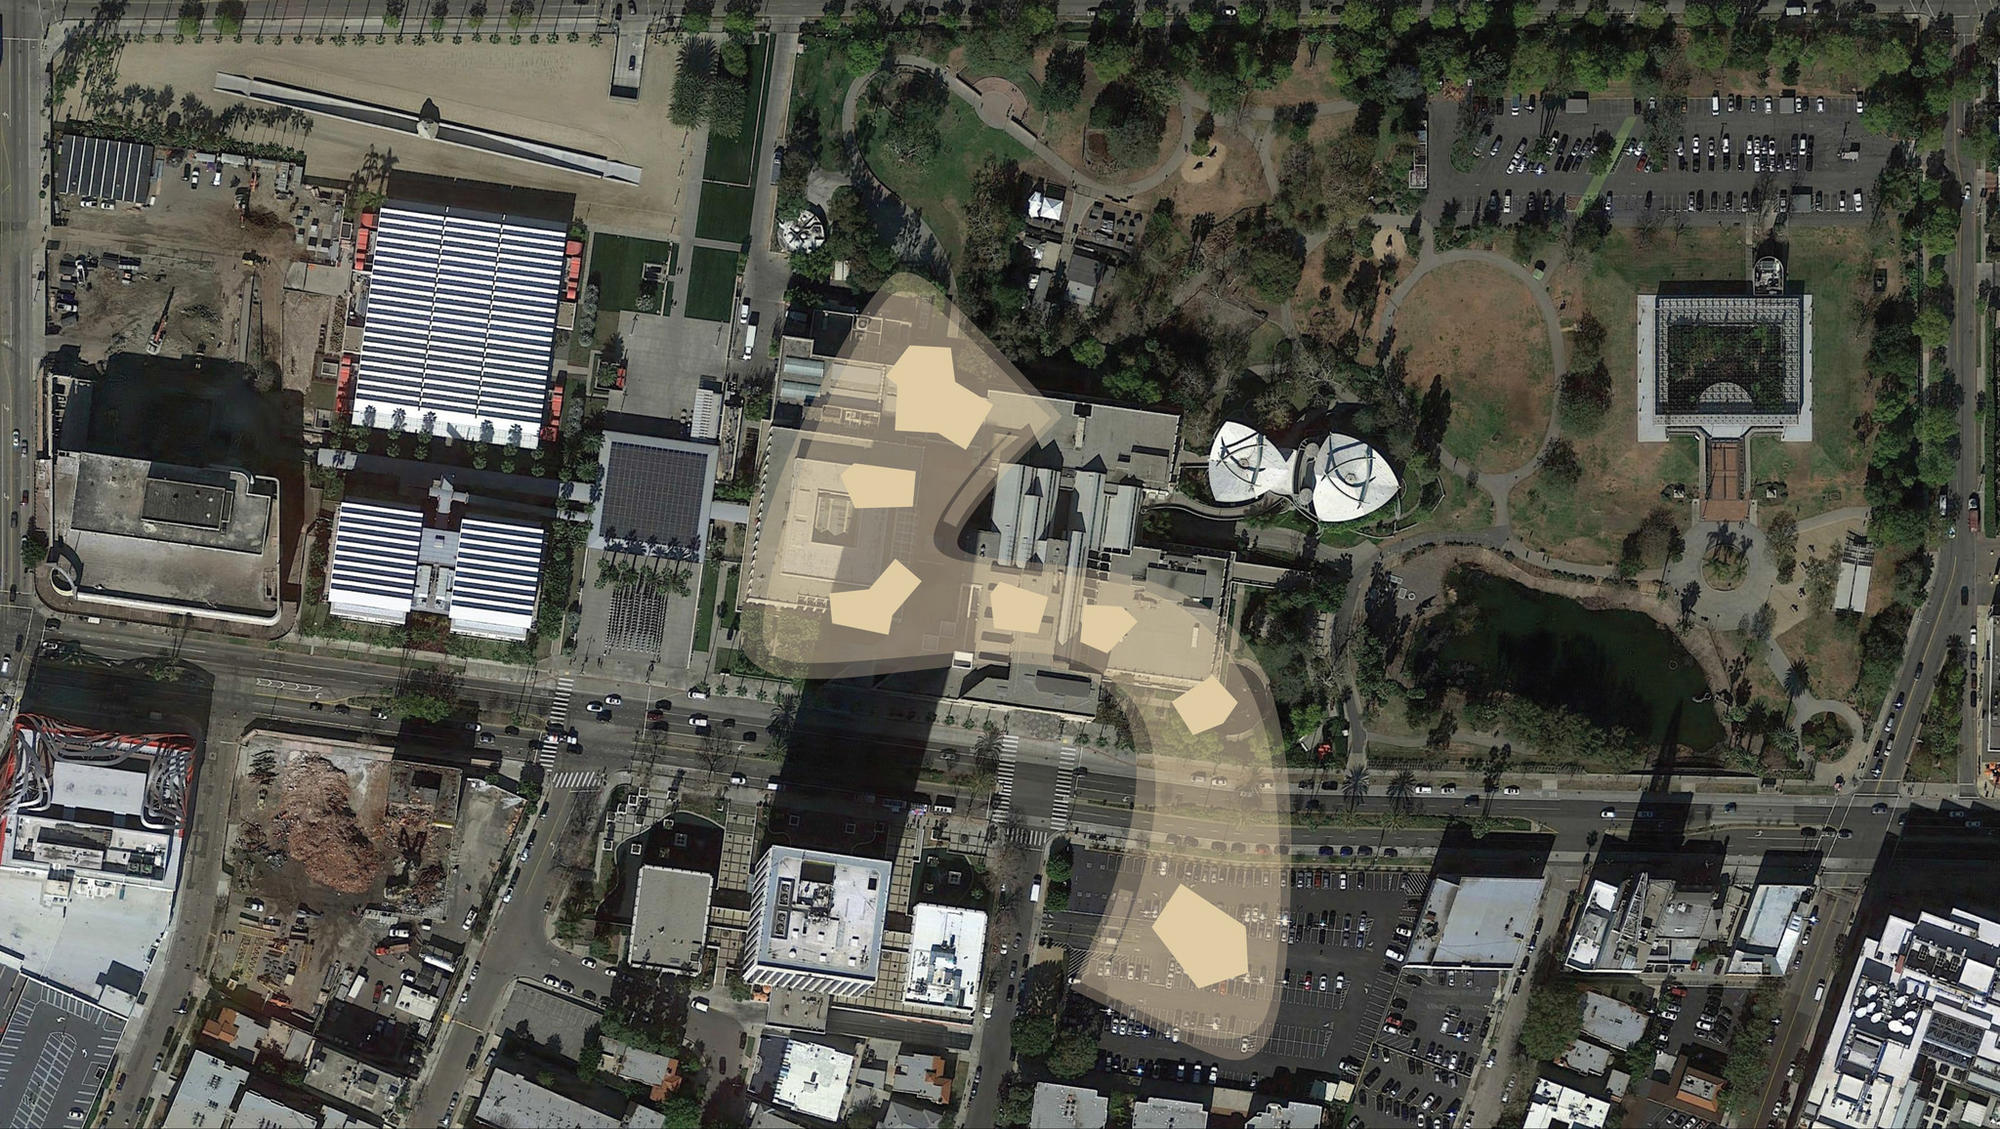 The footprint of the Zumthor design, which crosses Wilshire to what is now a LACMA-owned parking lot. Three 1965 buildings and a 1980s addition would be torn down.